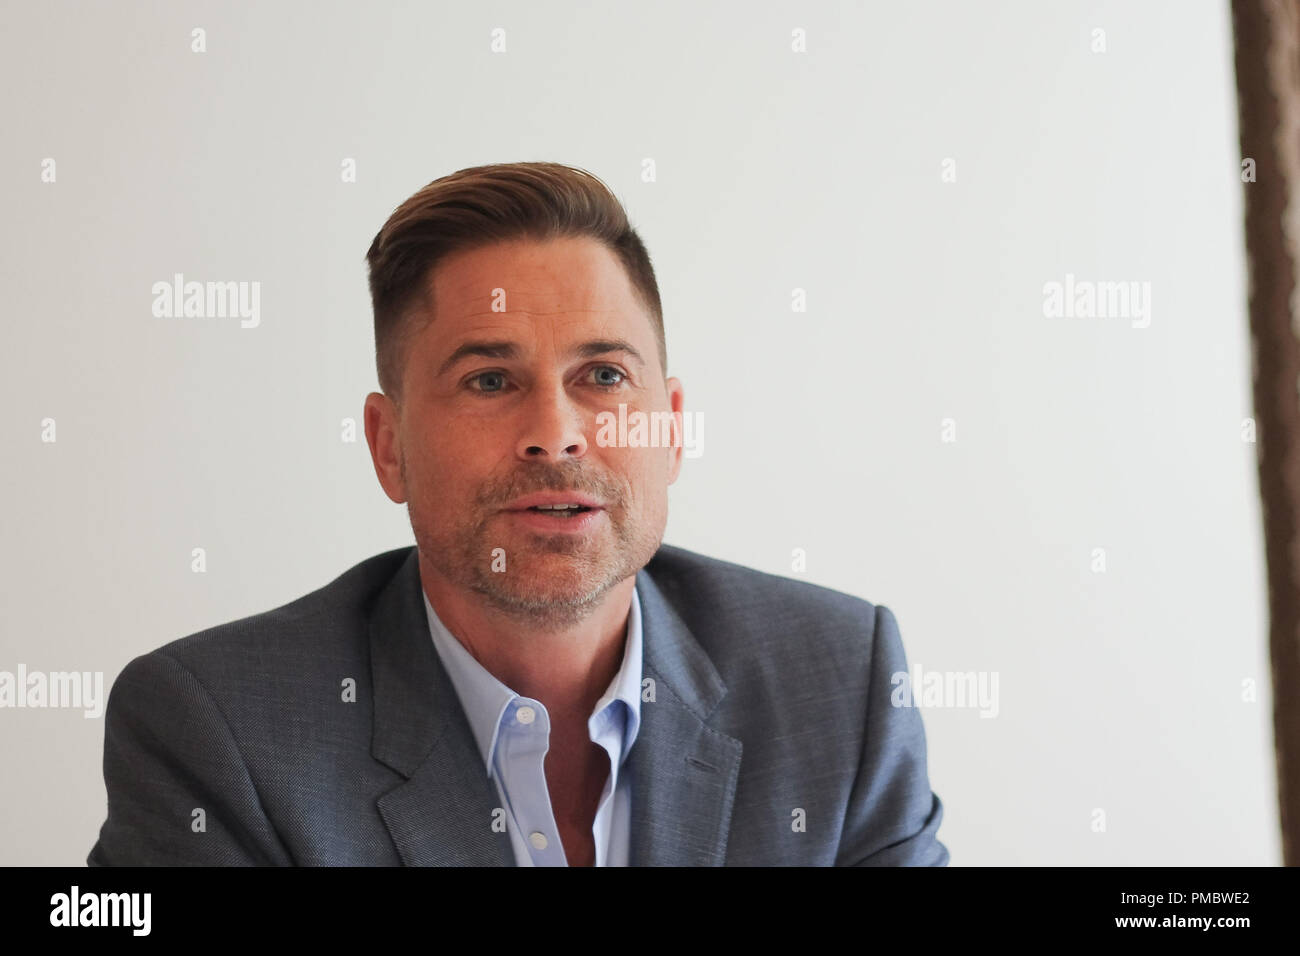 Rob Lowe at "Code Black" TV Series Press Conference held on October 12,  2016 at the Four Seasons Hotel in Beverly Hills, California. No Tabloids.  No USA sales for 30 days of